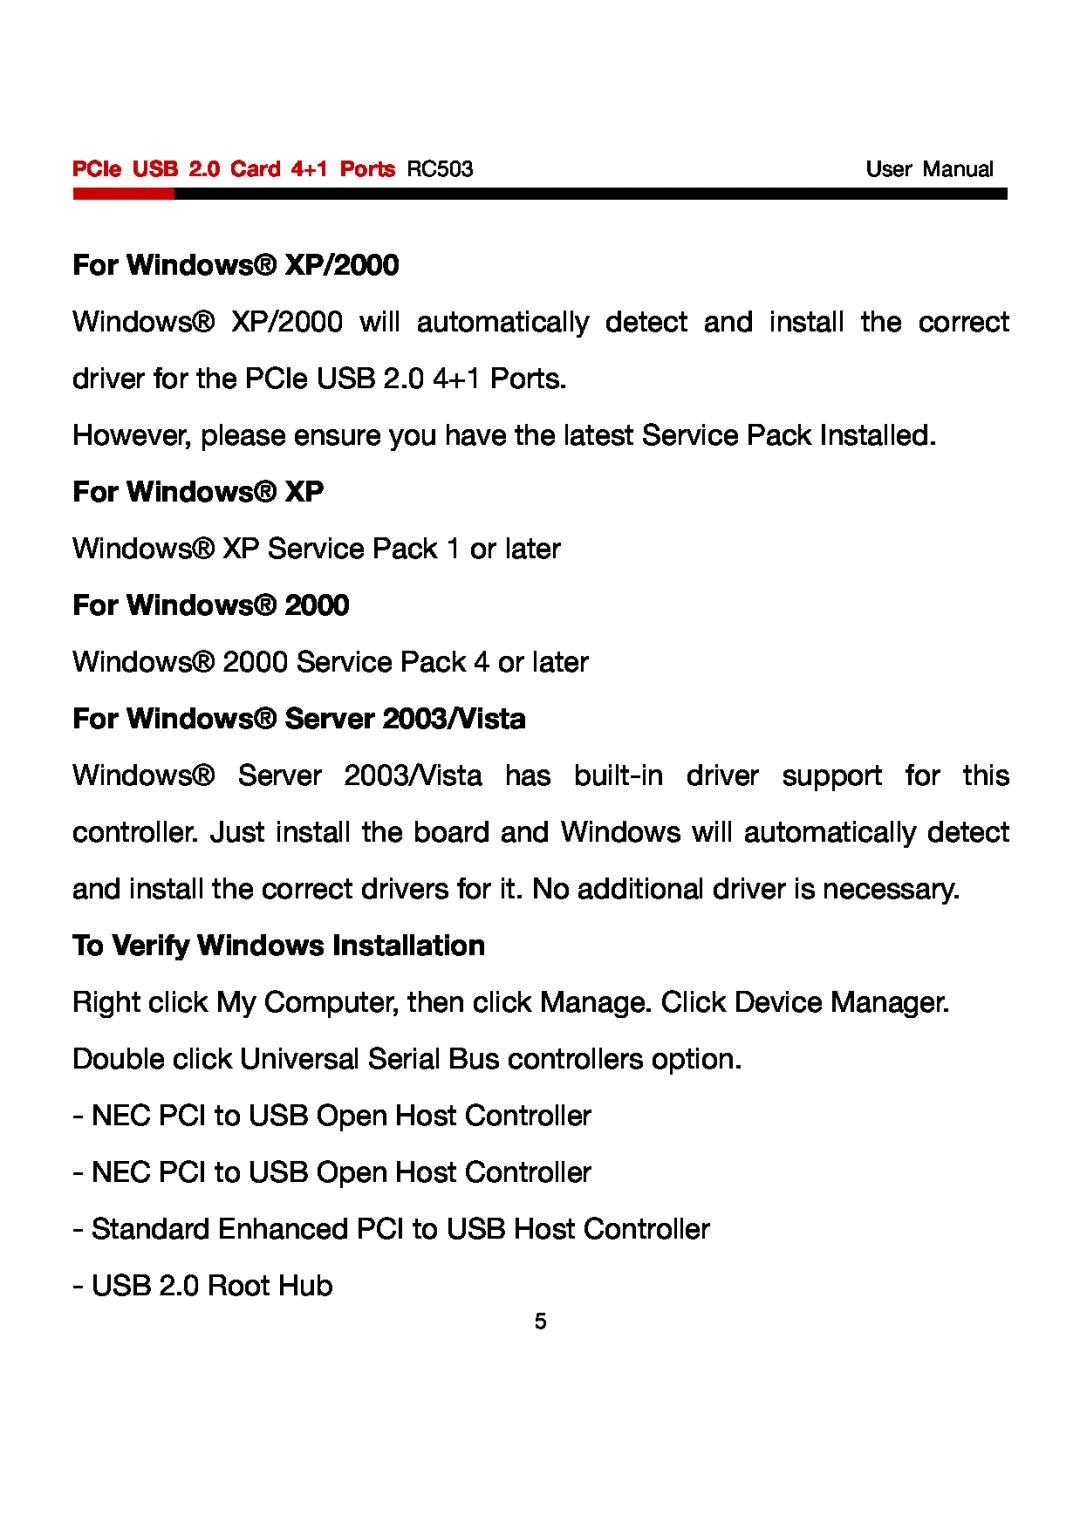 Rosewill RC503 user manual For Windows XP/2000, For Windows Server 2003/Vista, To Verify Windows Installation 